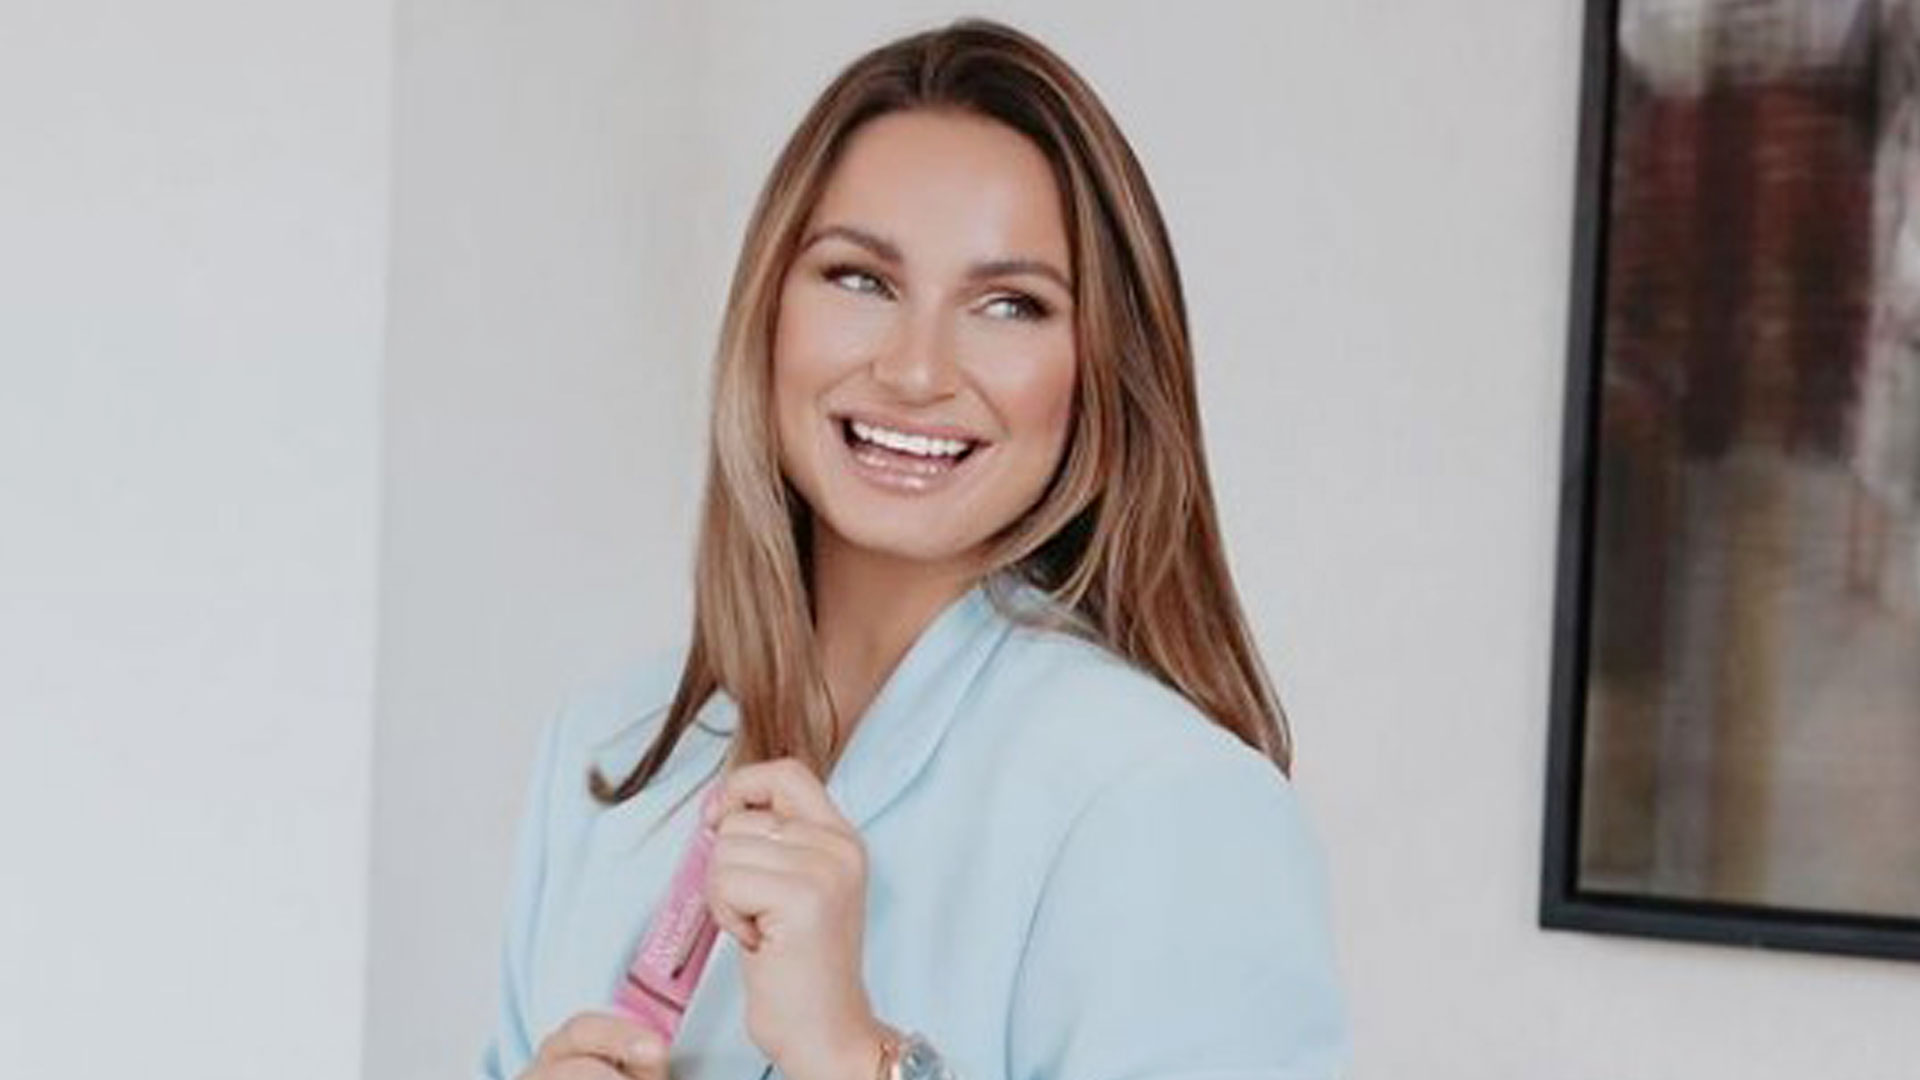 Inside Sam Faiers’ £2.25m Surrey mansion with garden so big it looks like a park